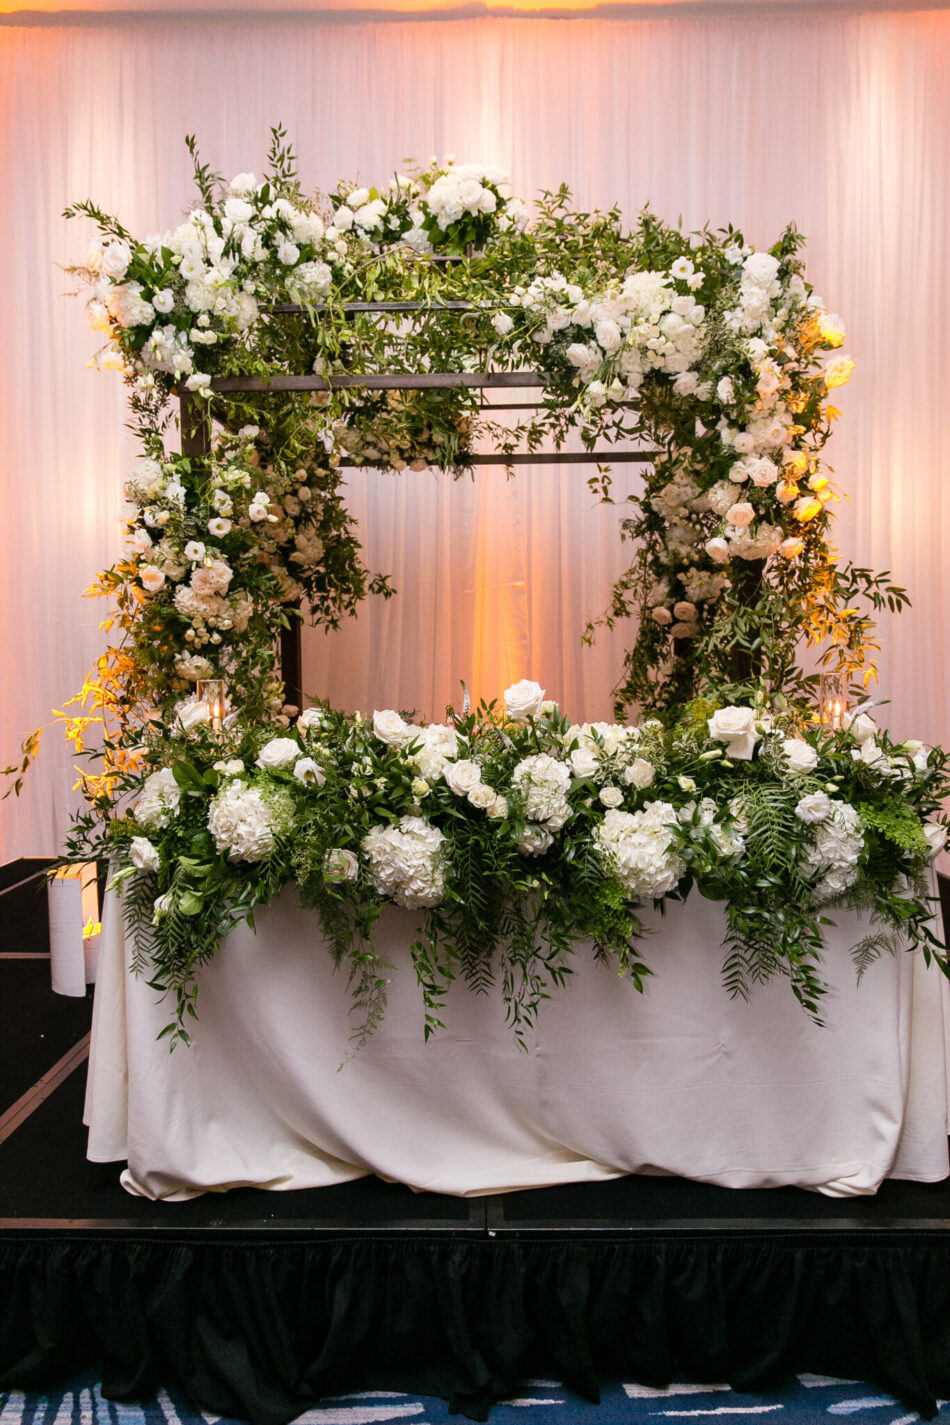 sweetheart table, floral filled sweetheart table, stunning vibrant wedding, floral design, florist, wedding florist, wedding flowers, orange county weddings, orange county wedding florist, orange county florist, orange county floral design, flowers by cina